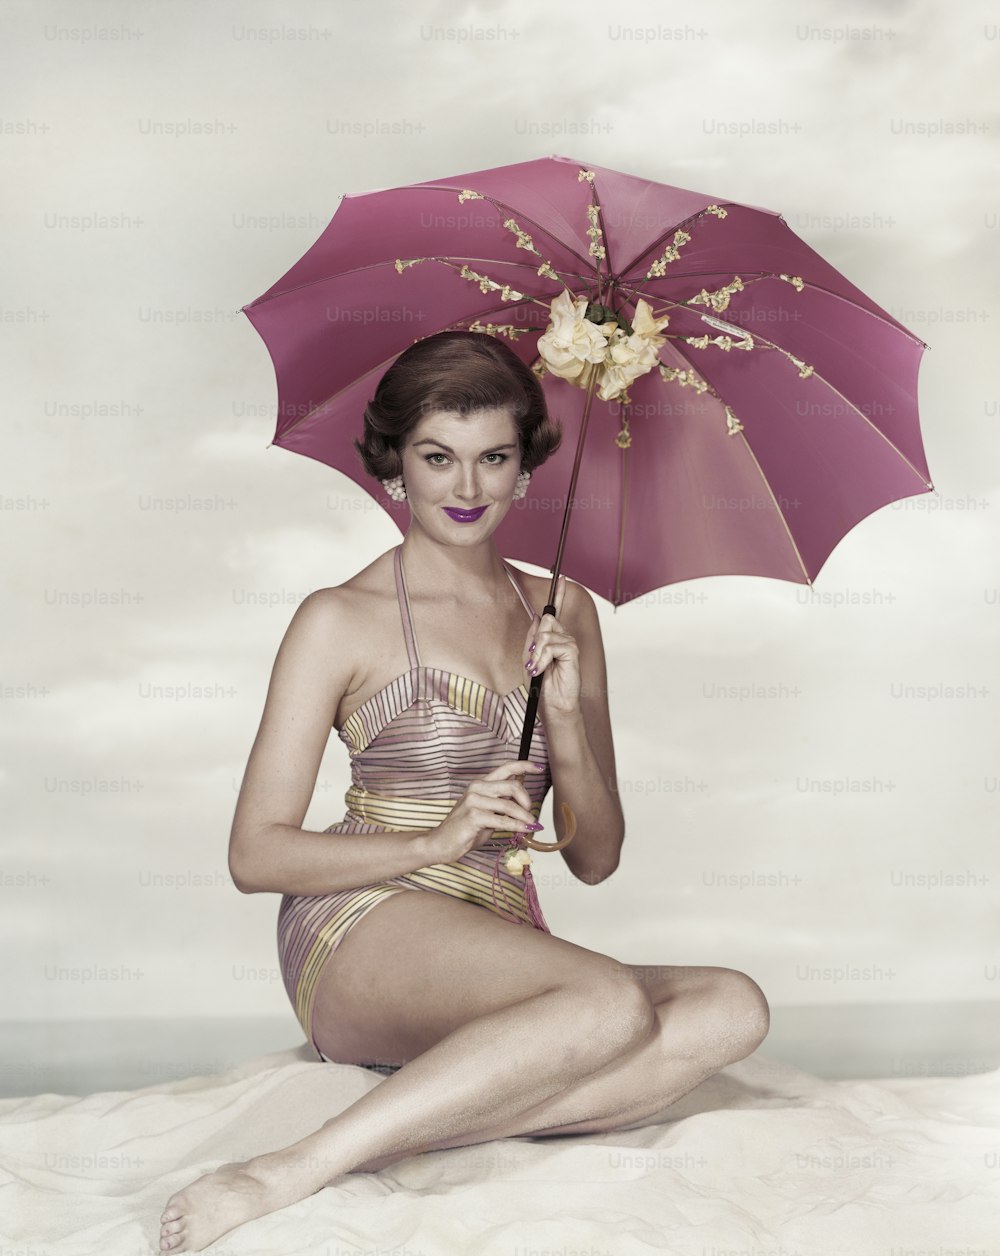 a woman in a bathing suit holding an umbrella